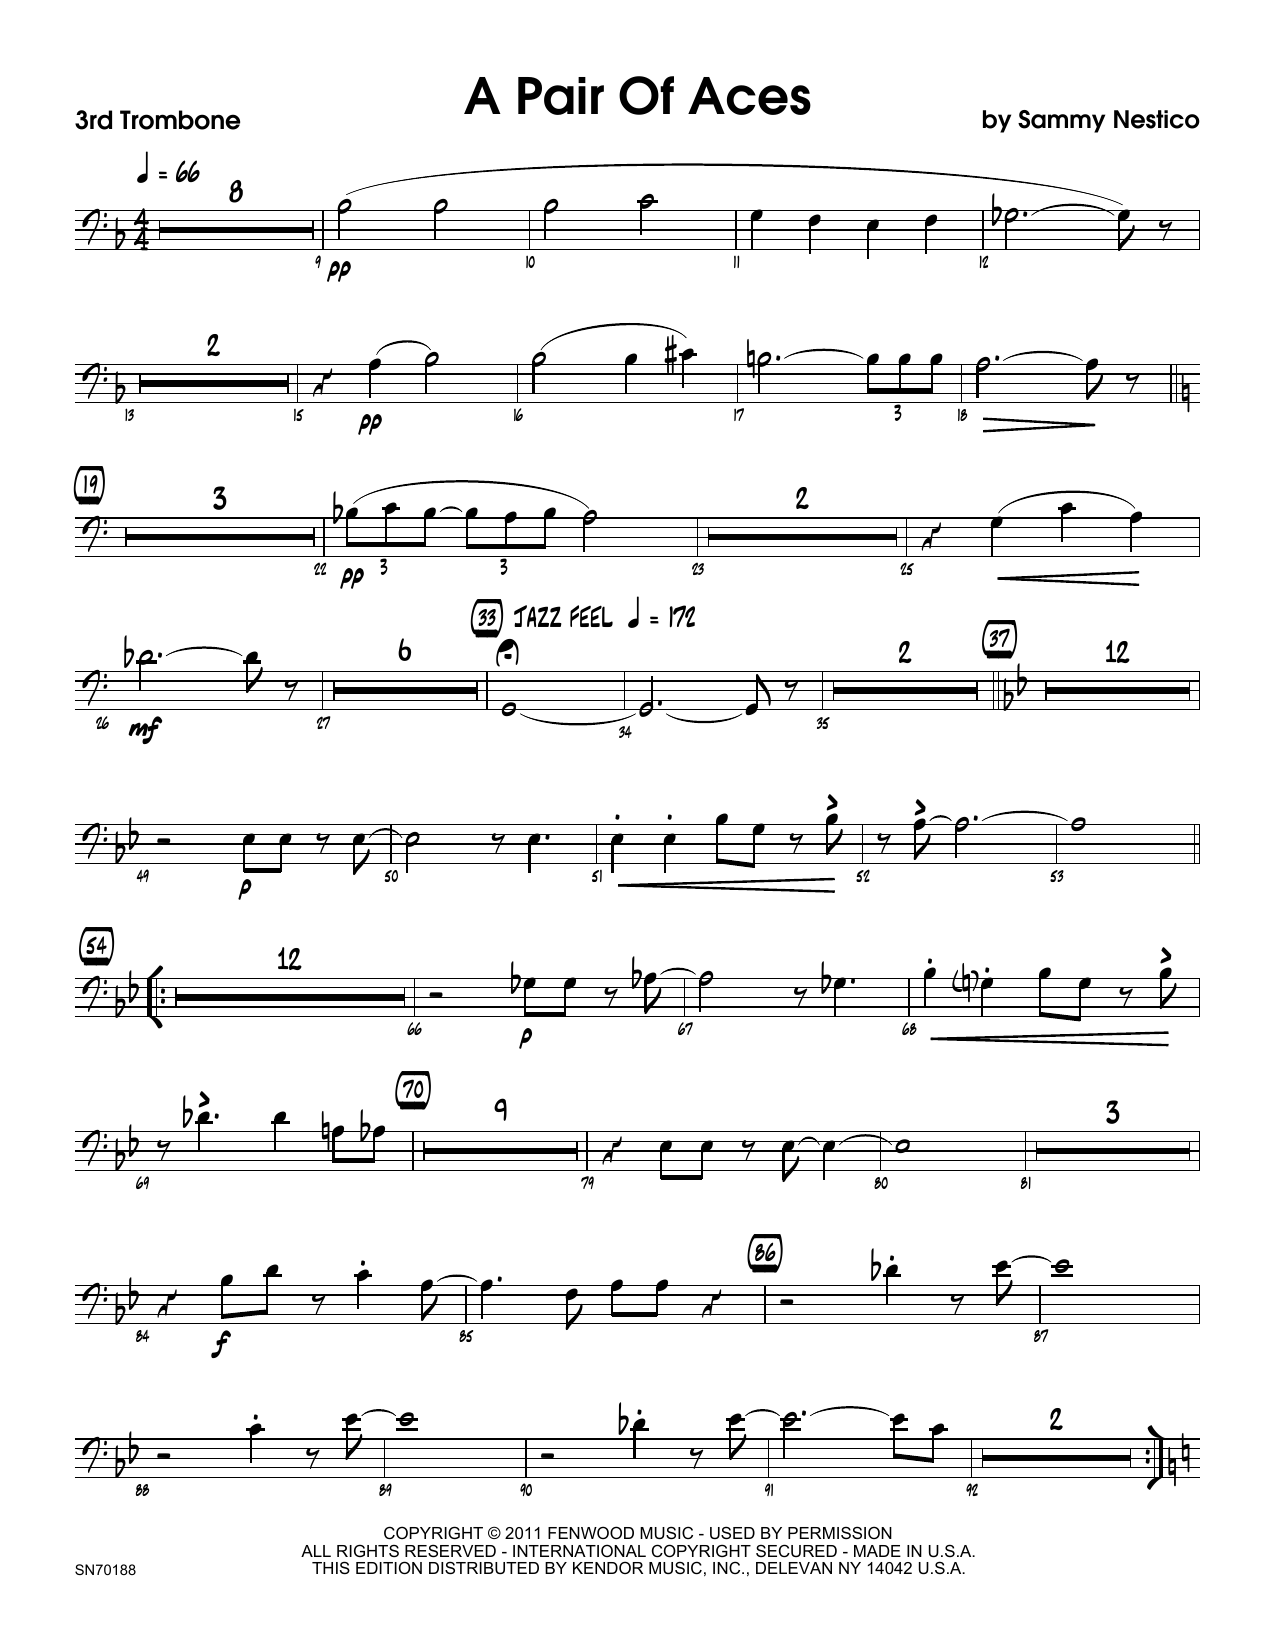 Download Sammy Nestico A Pair Of Aces - 3rd Trombone Sheet Music